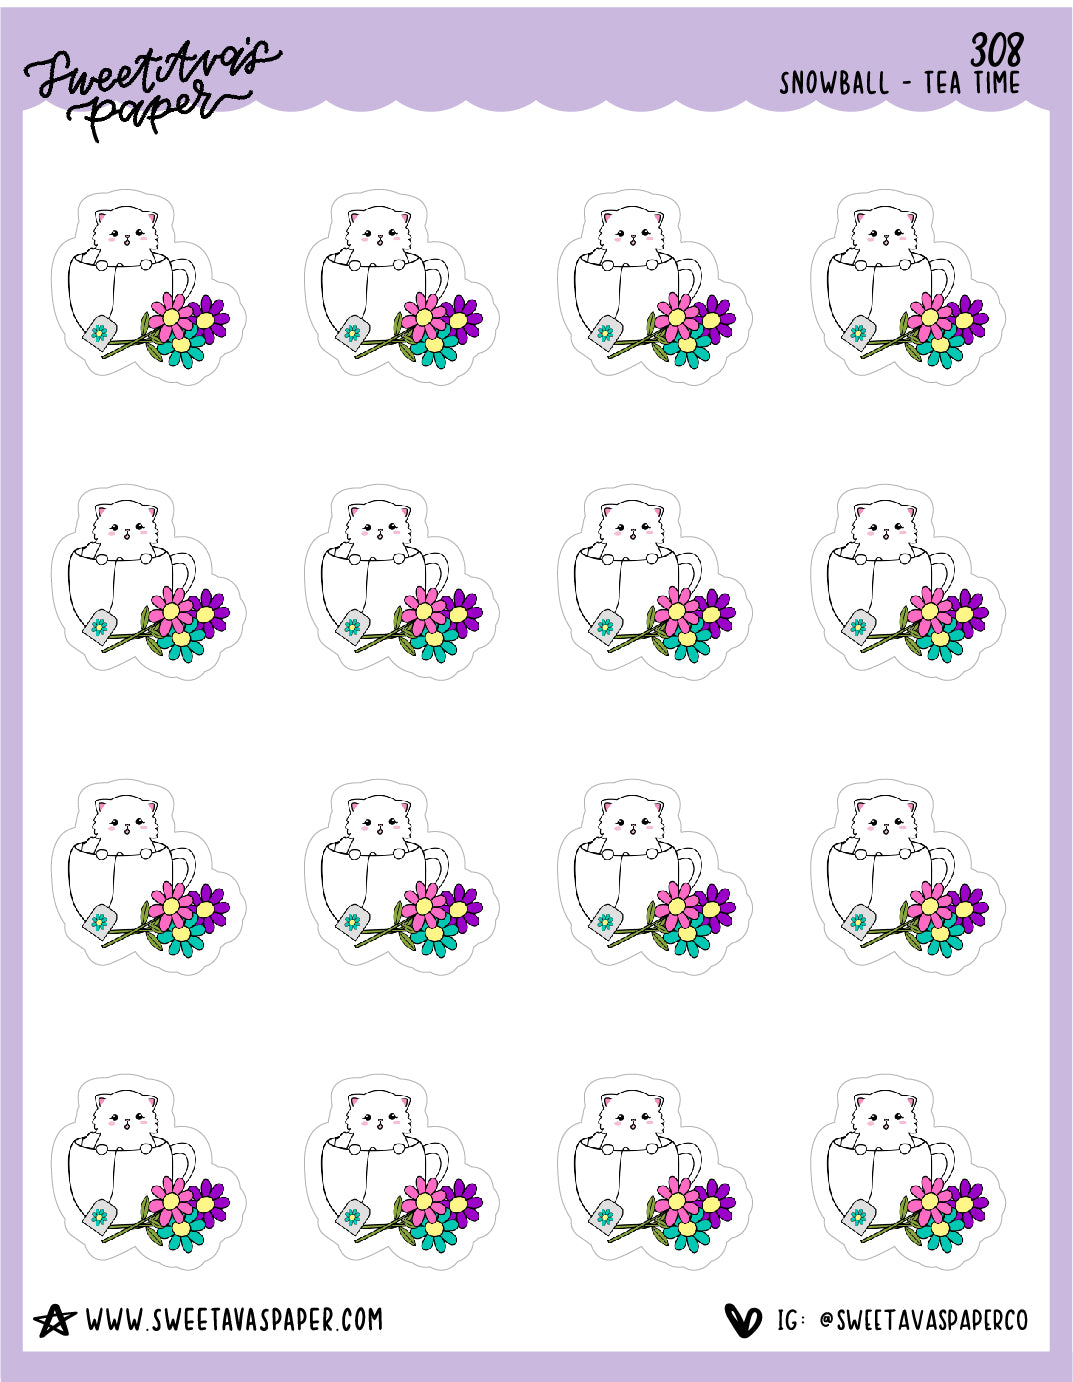 Tea Planner Stickers - Snowball The Cat - [308]